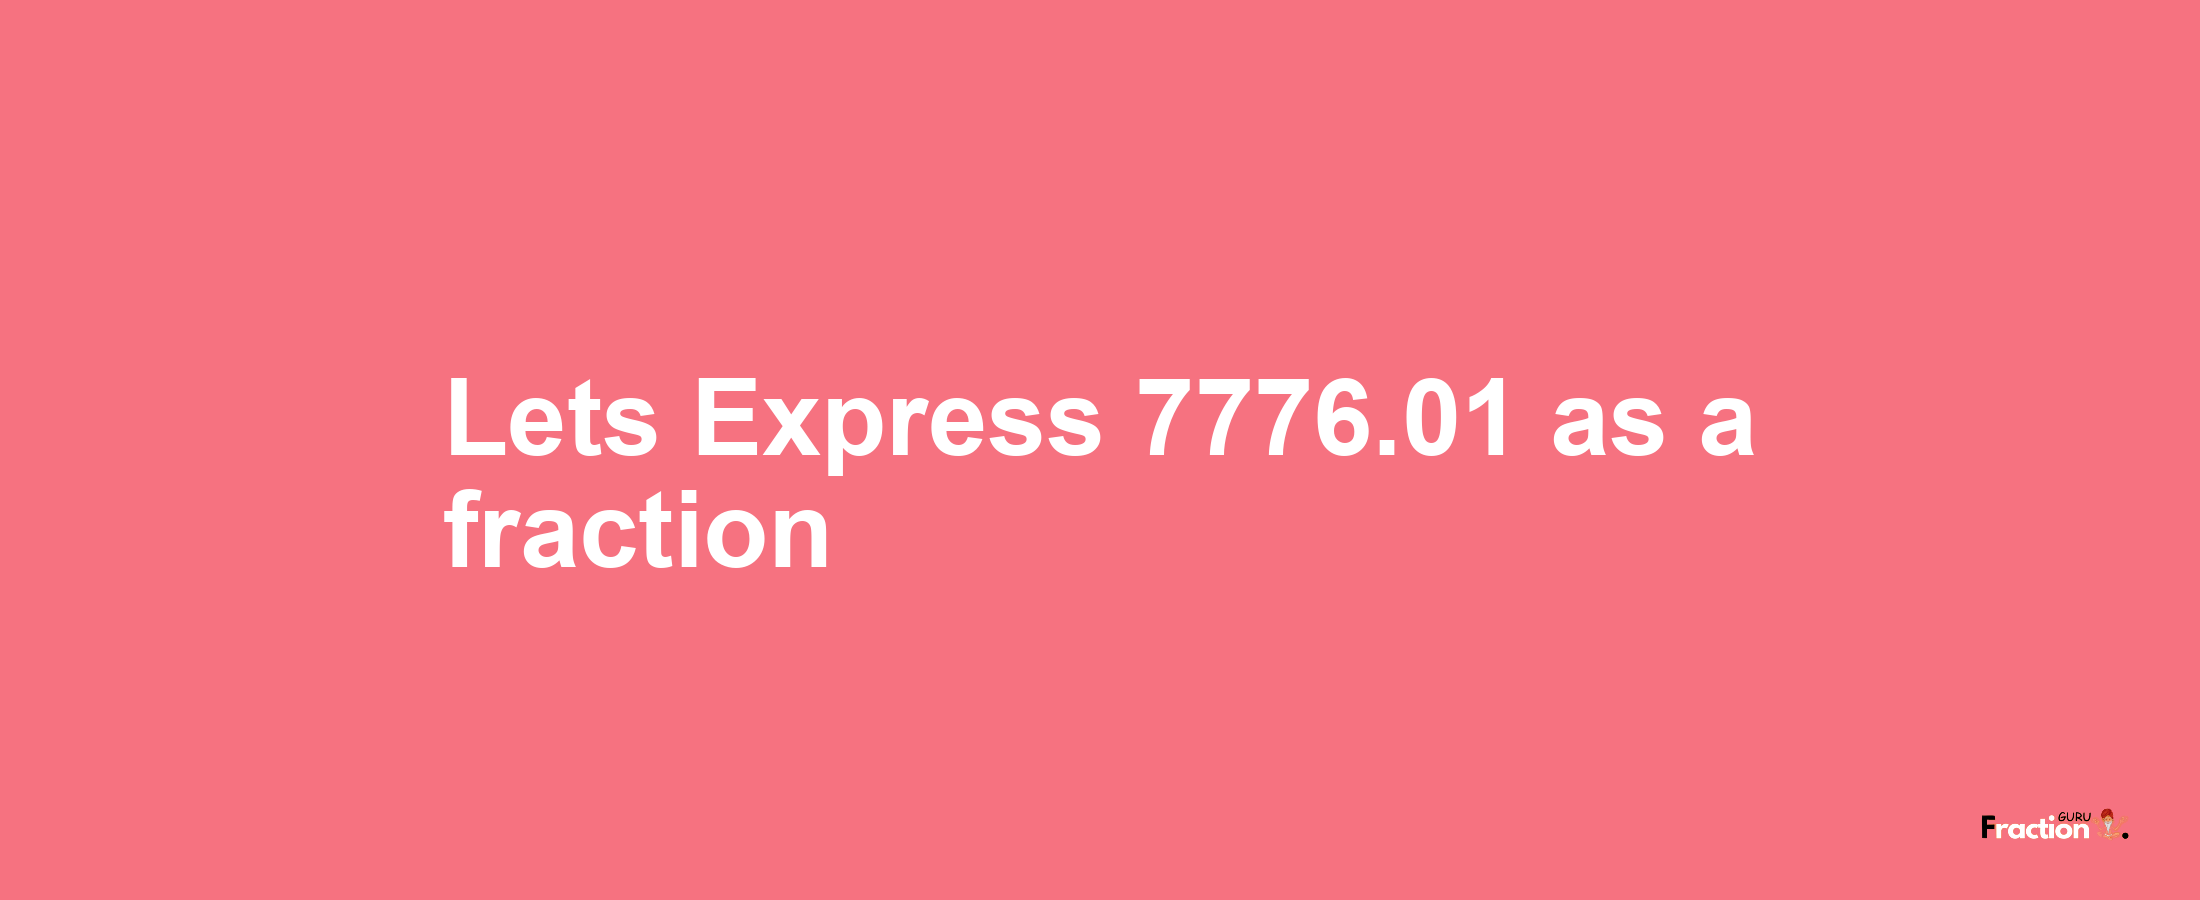 Lets Express 7776.01 as afraction